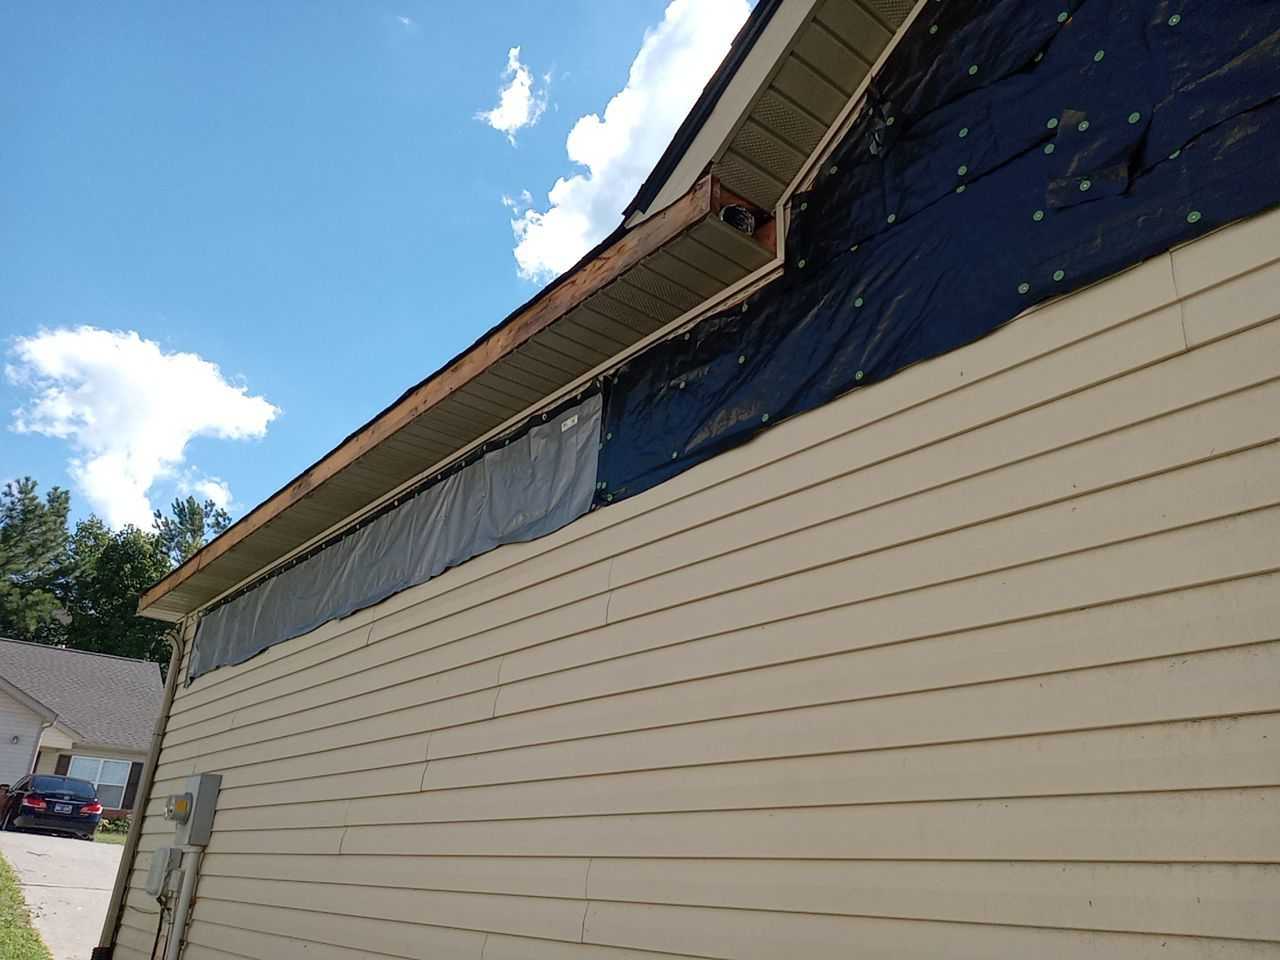 Missing siding and fascia